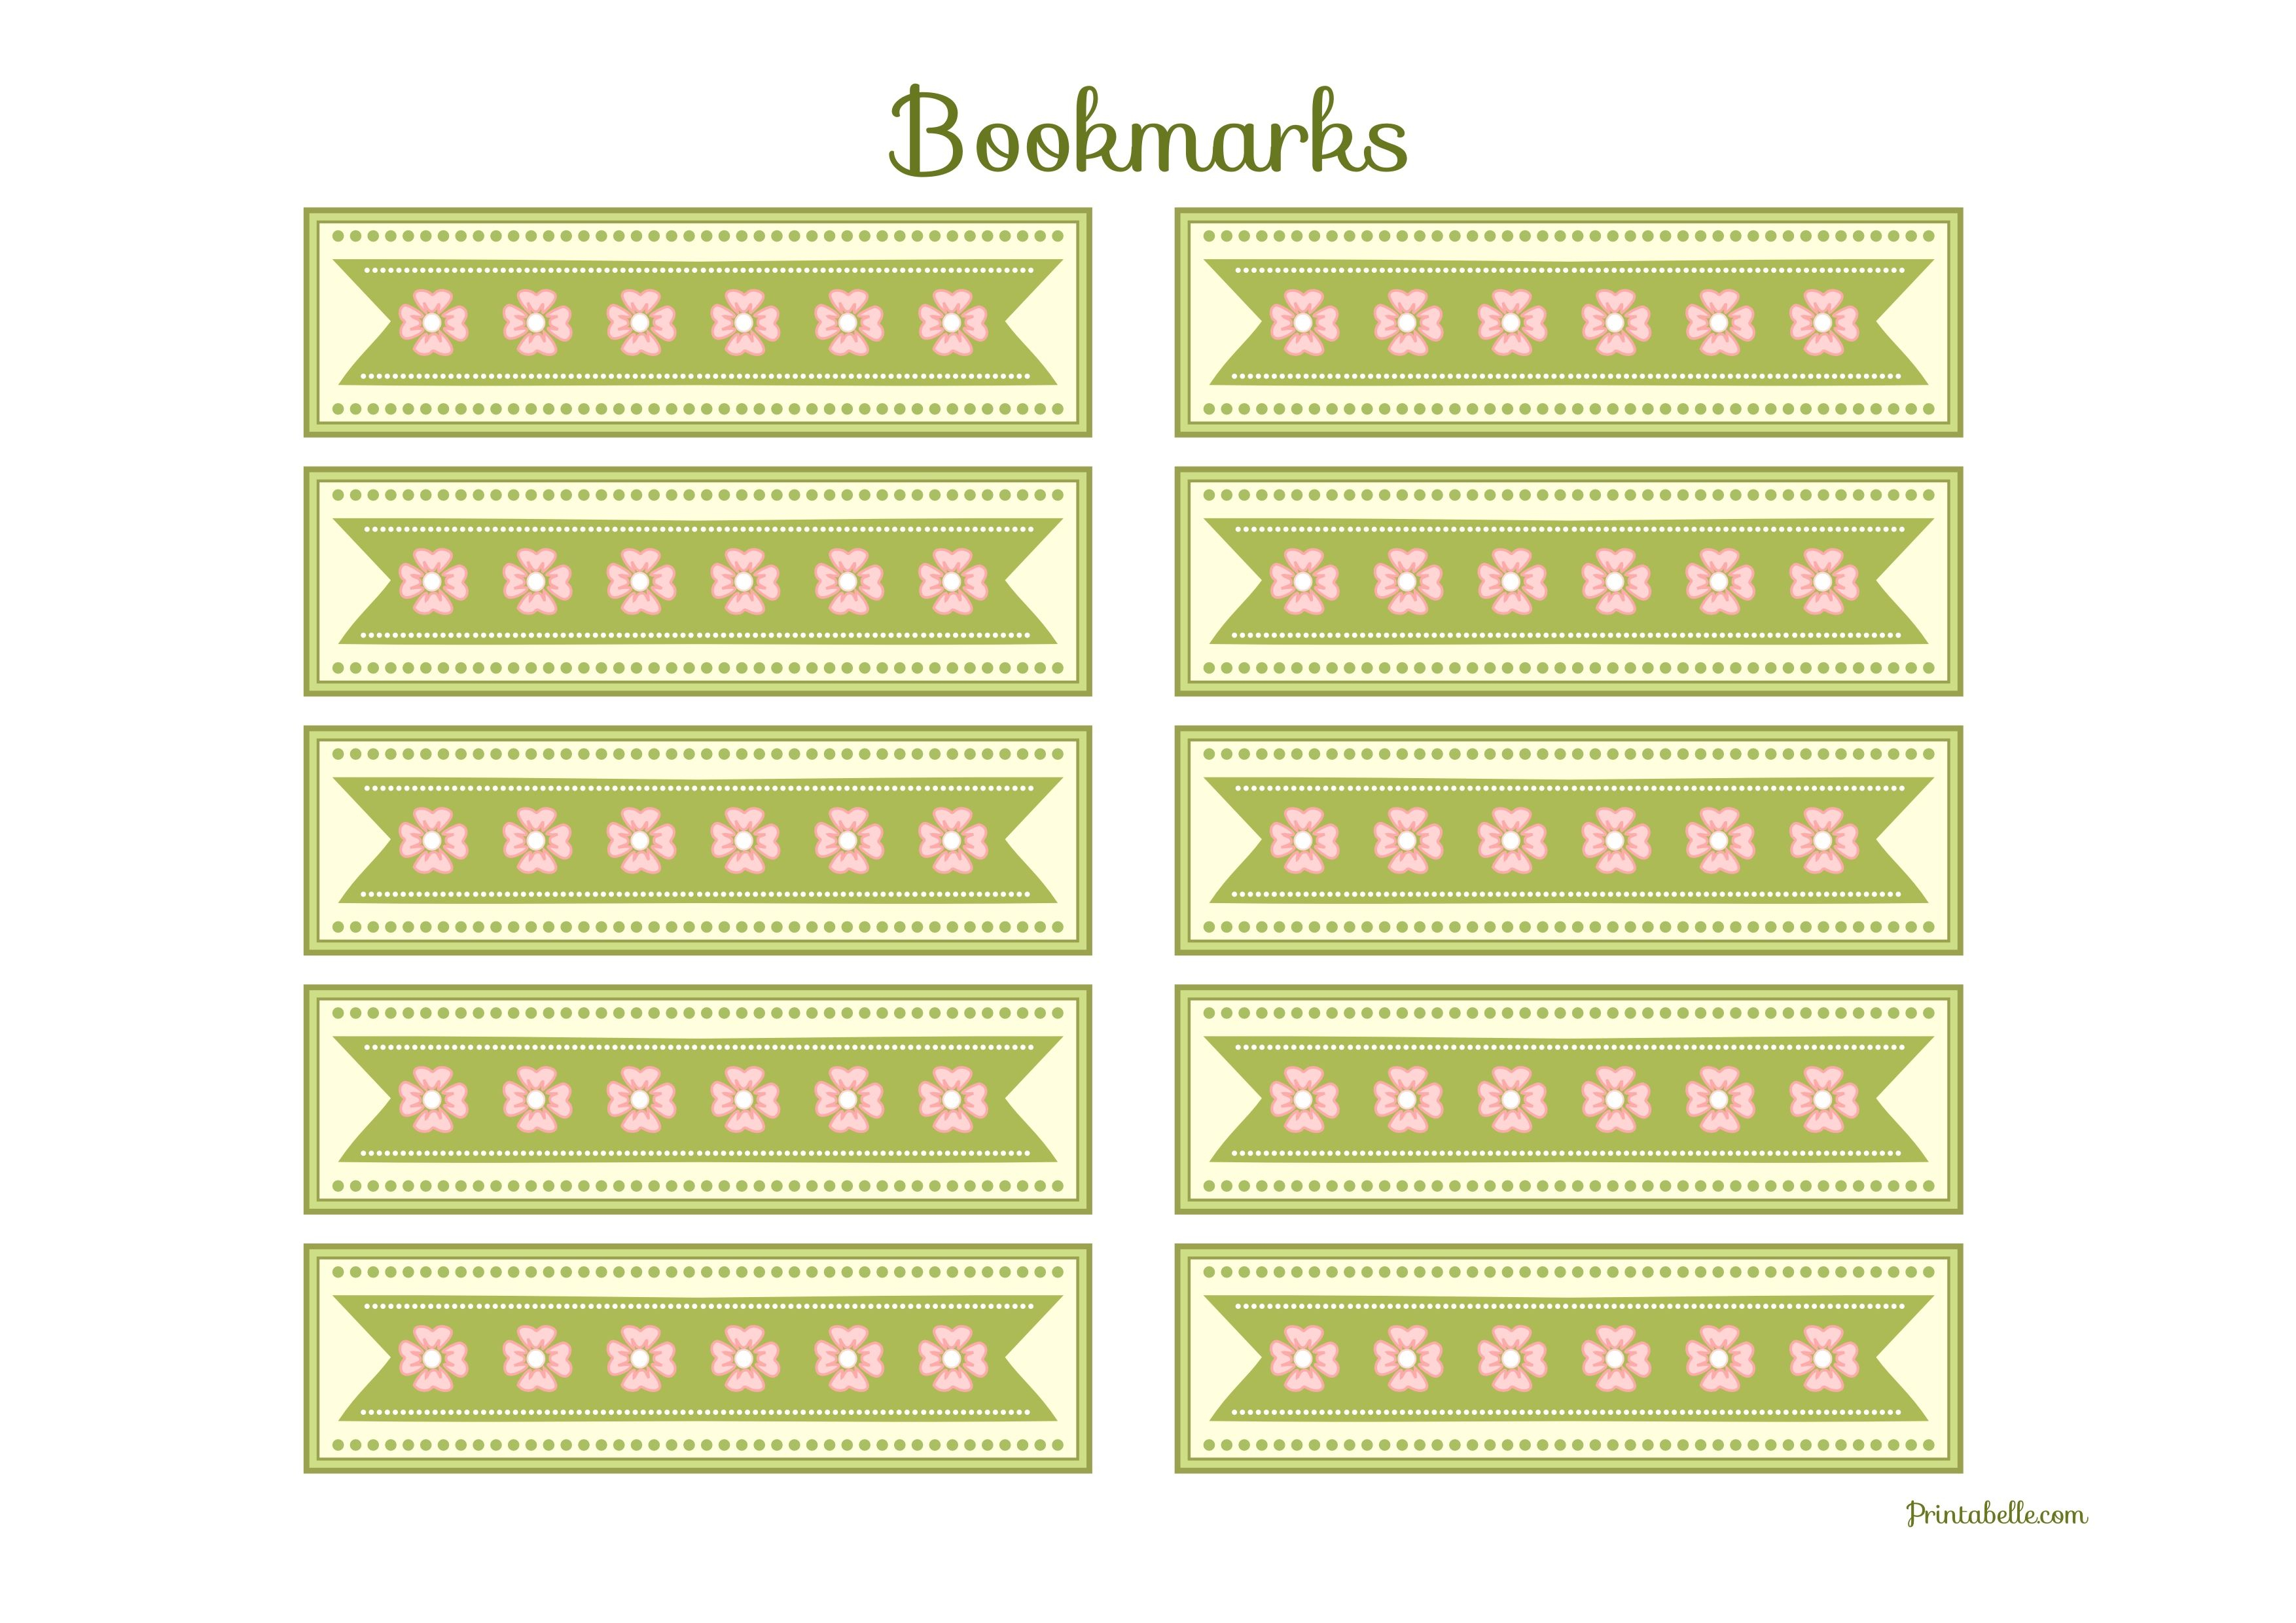 Free Vintage Baby Shower Printables From Printabelle | Vintage Baby - Free Printable Baby Bookmarks